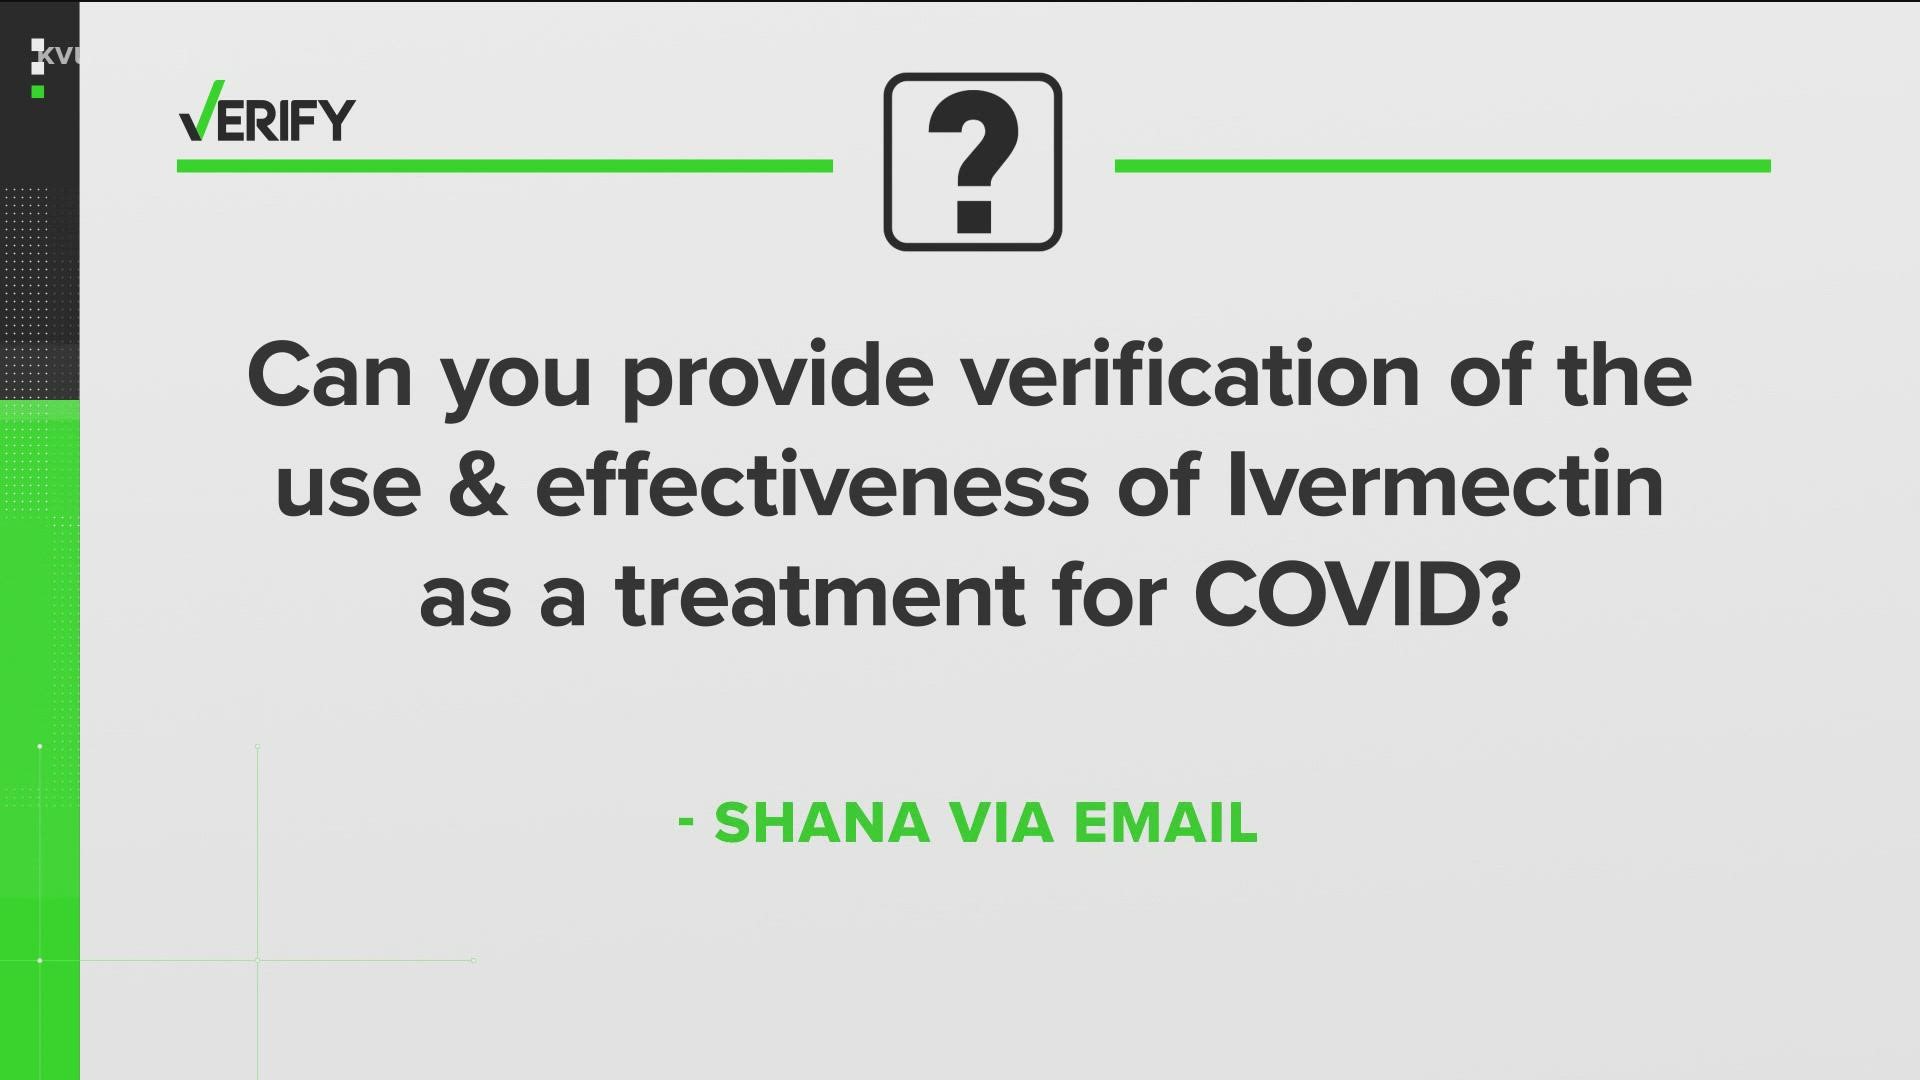 “Can you provide verification of the use & effectiveness of Ivermectin as a treatment for COVID?”